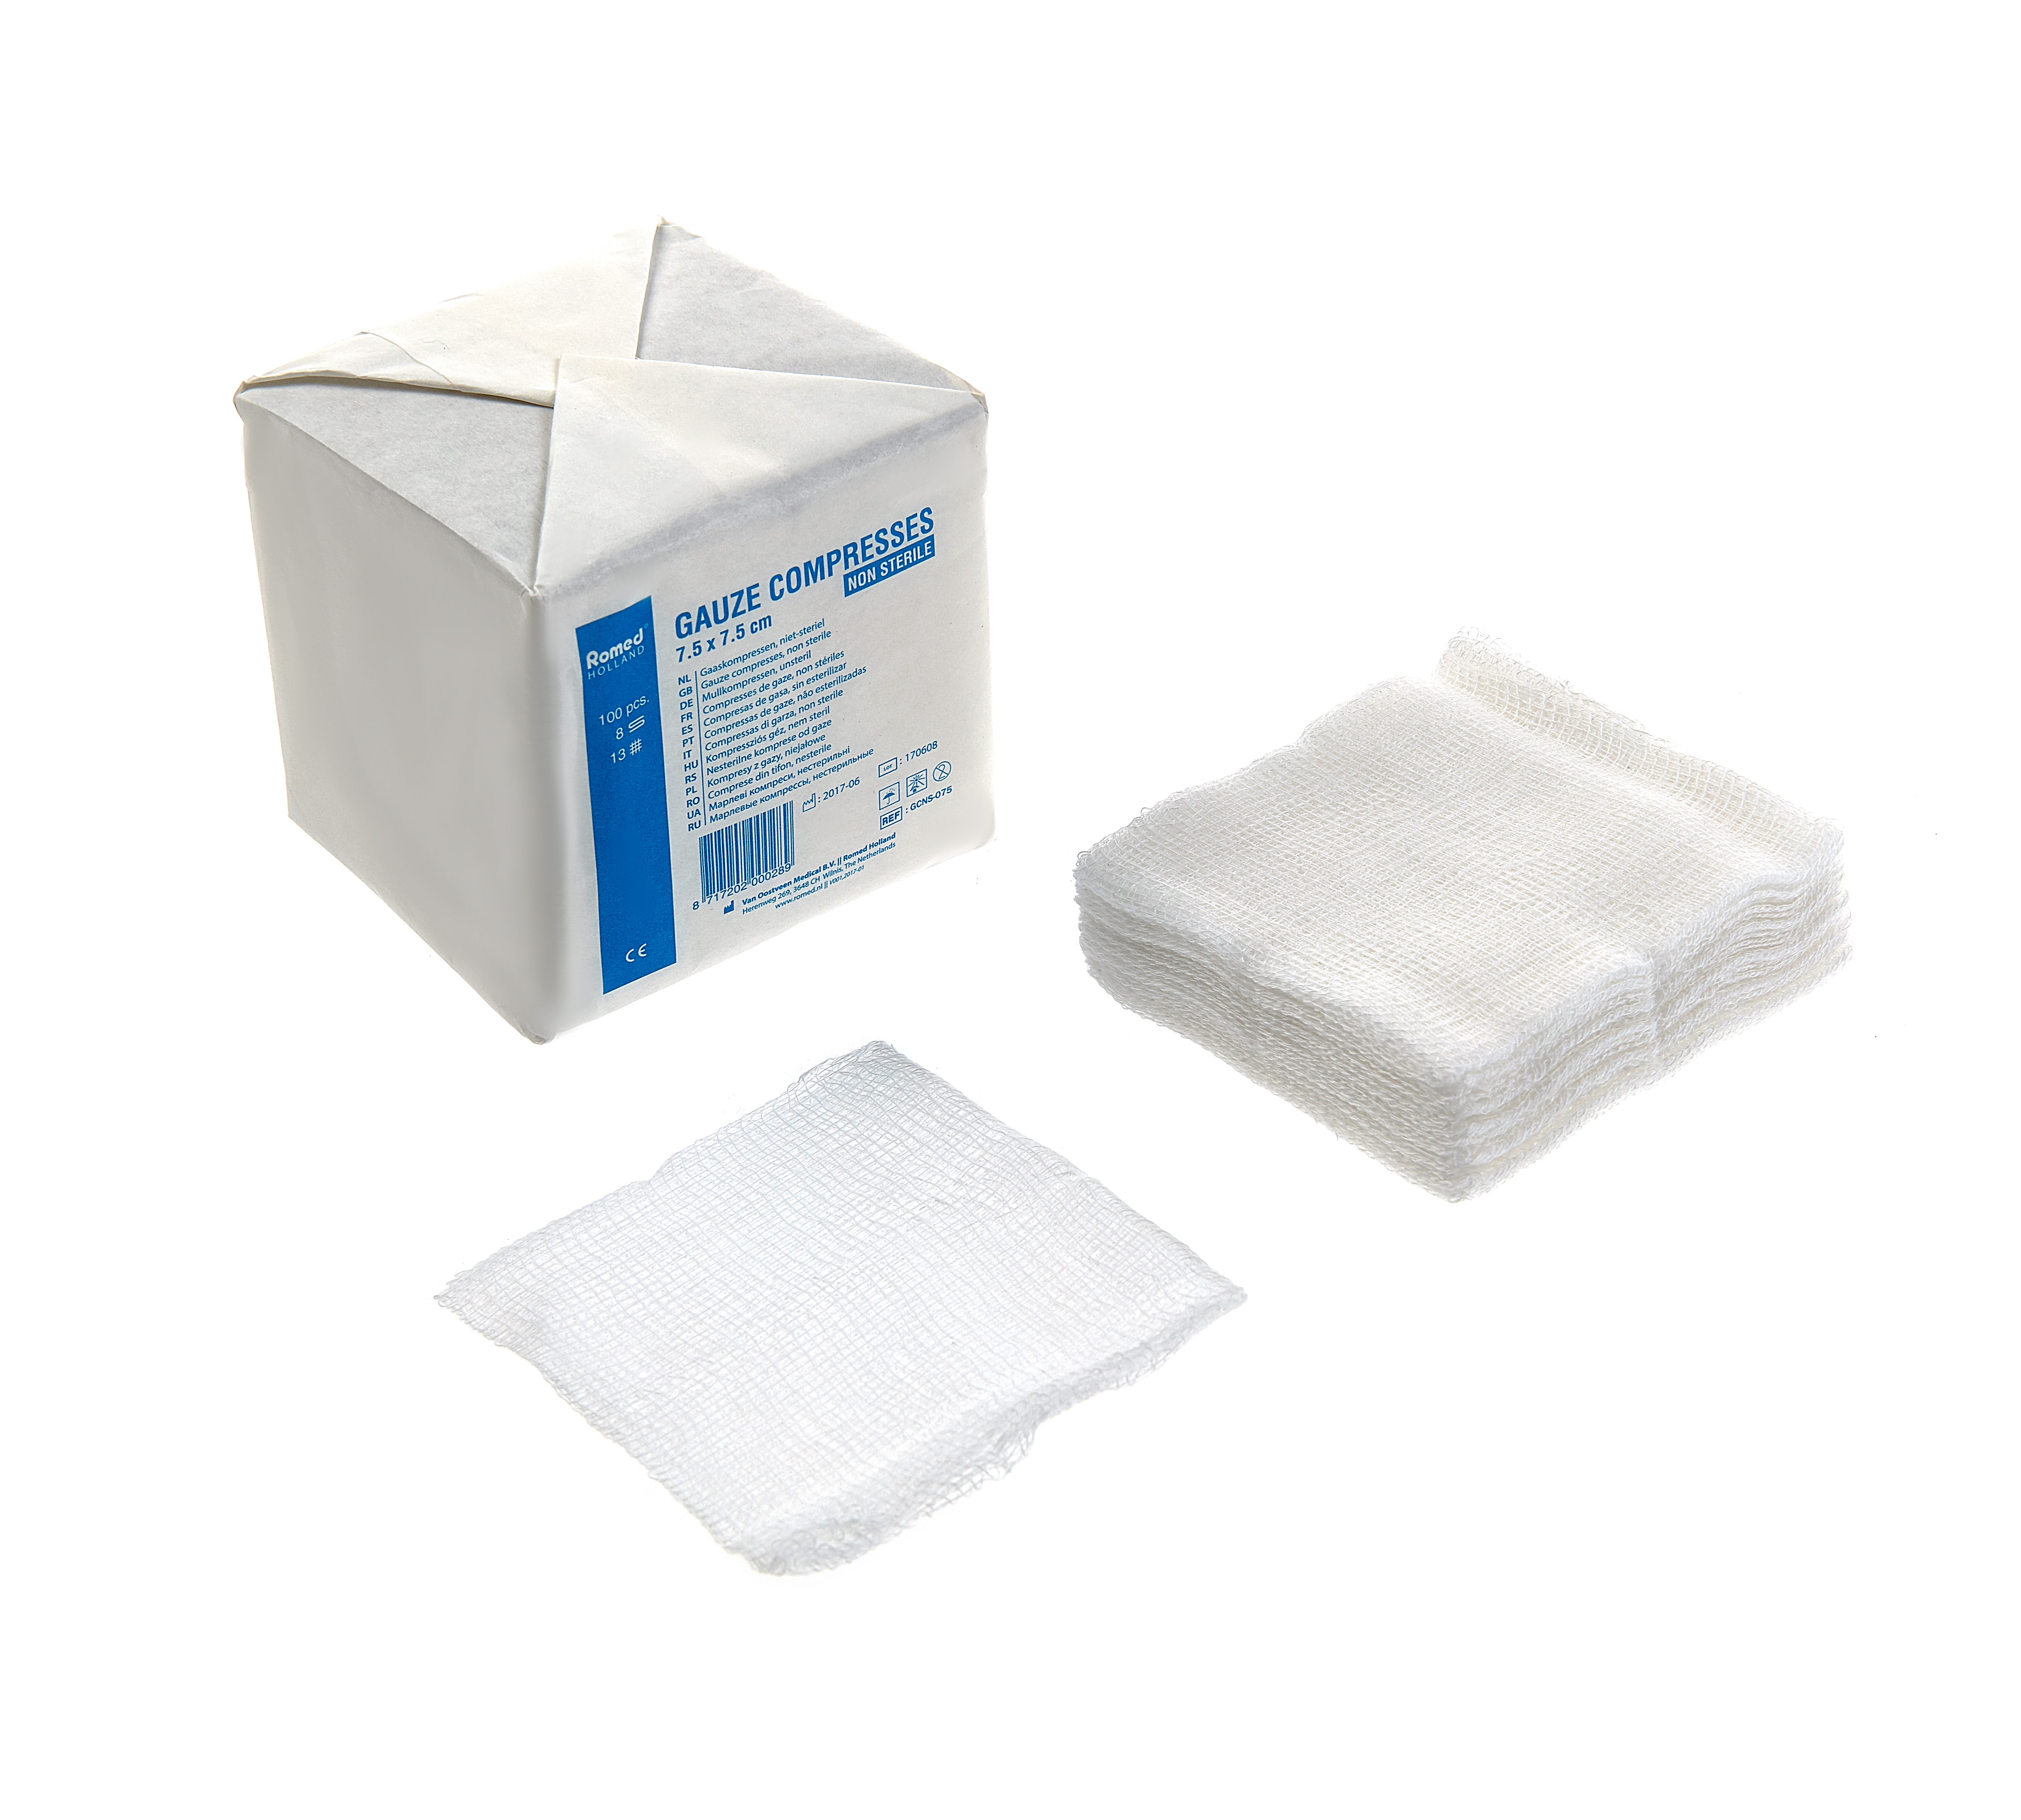 GCNS-050 Romed gauze compresses, non sterile, 13 threads, 8 ply, 5 x 5cm, per 100 pcs in a paper pack, 200 paper packs in a carton.